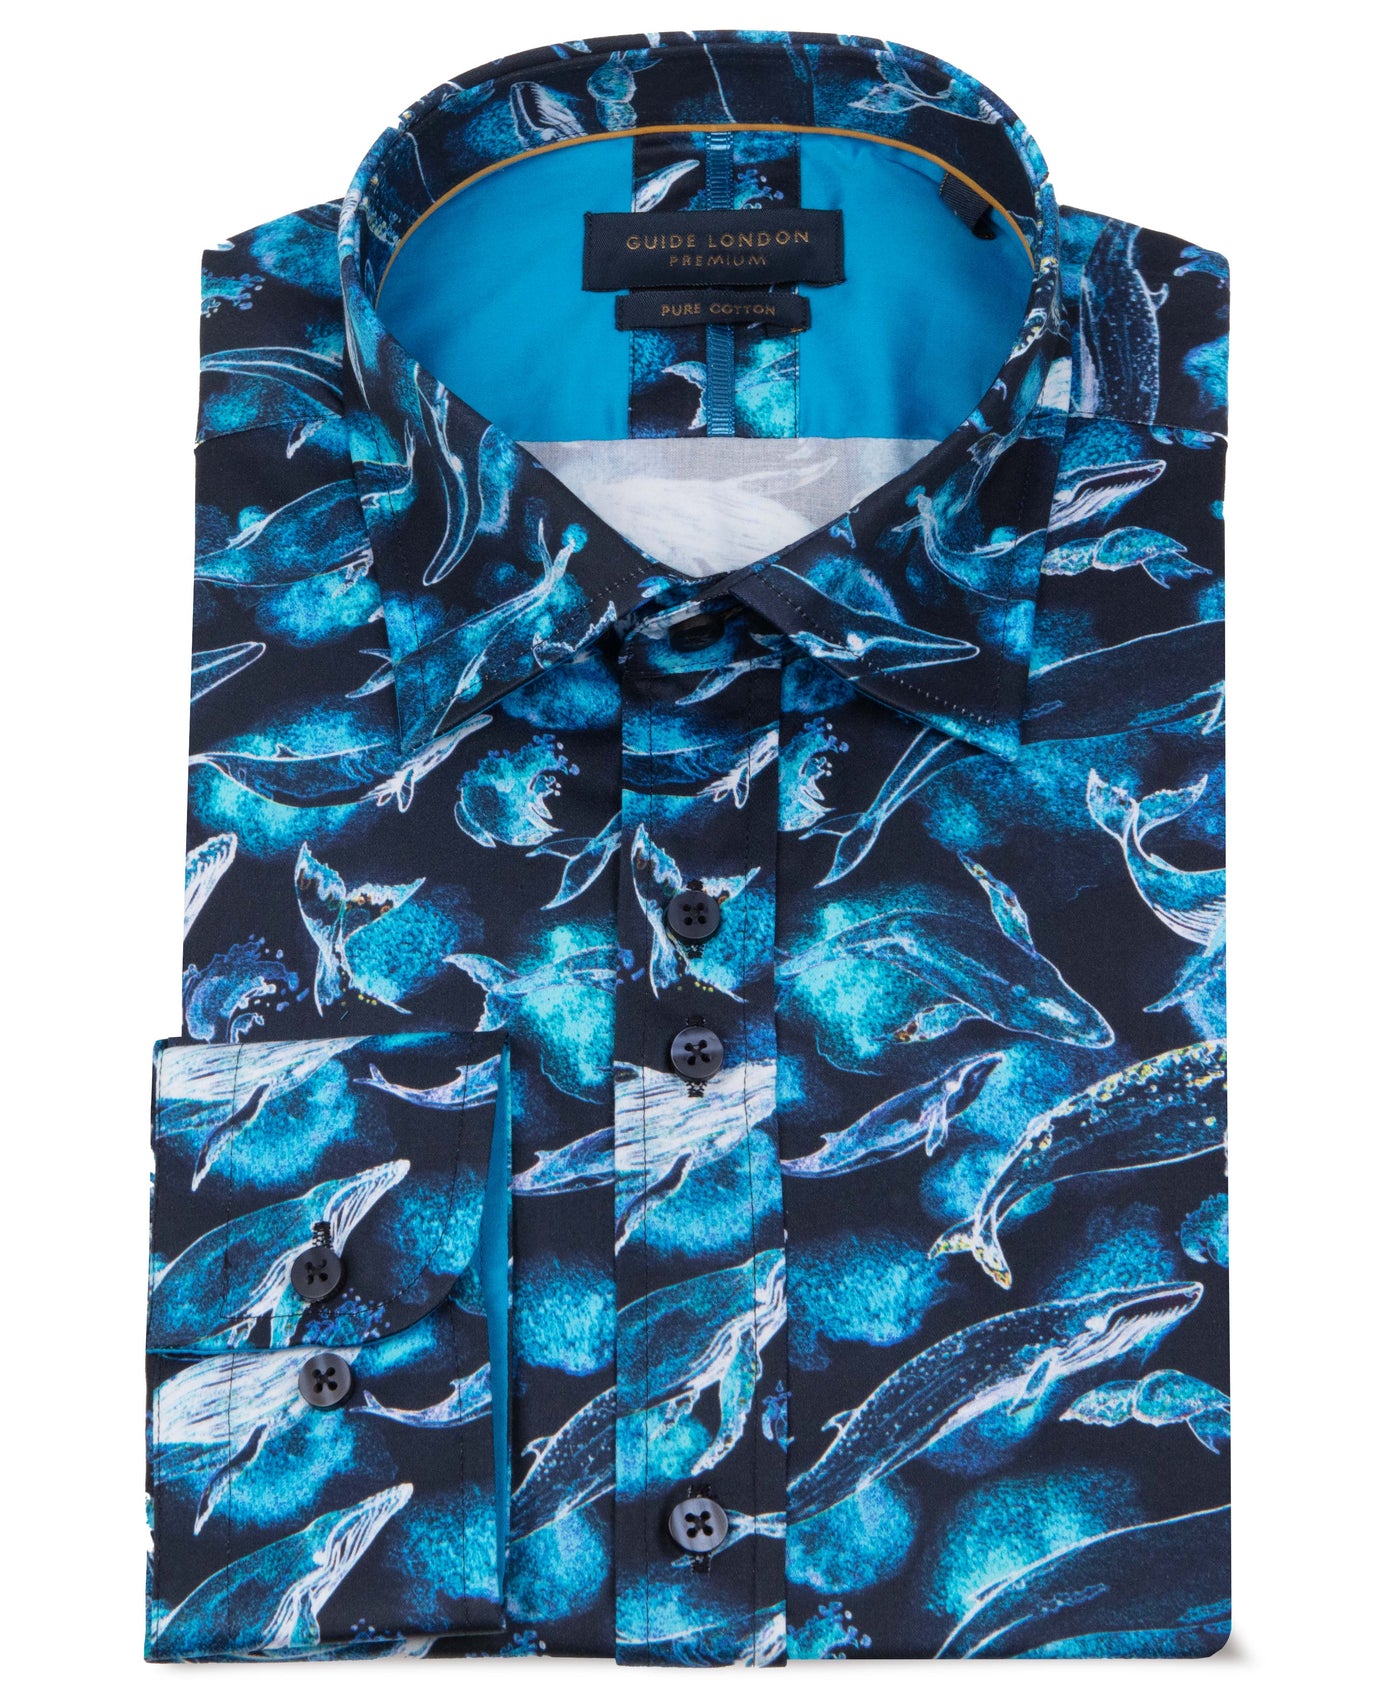 Whale Print Cotton Shirt in Turquoise and Navy